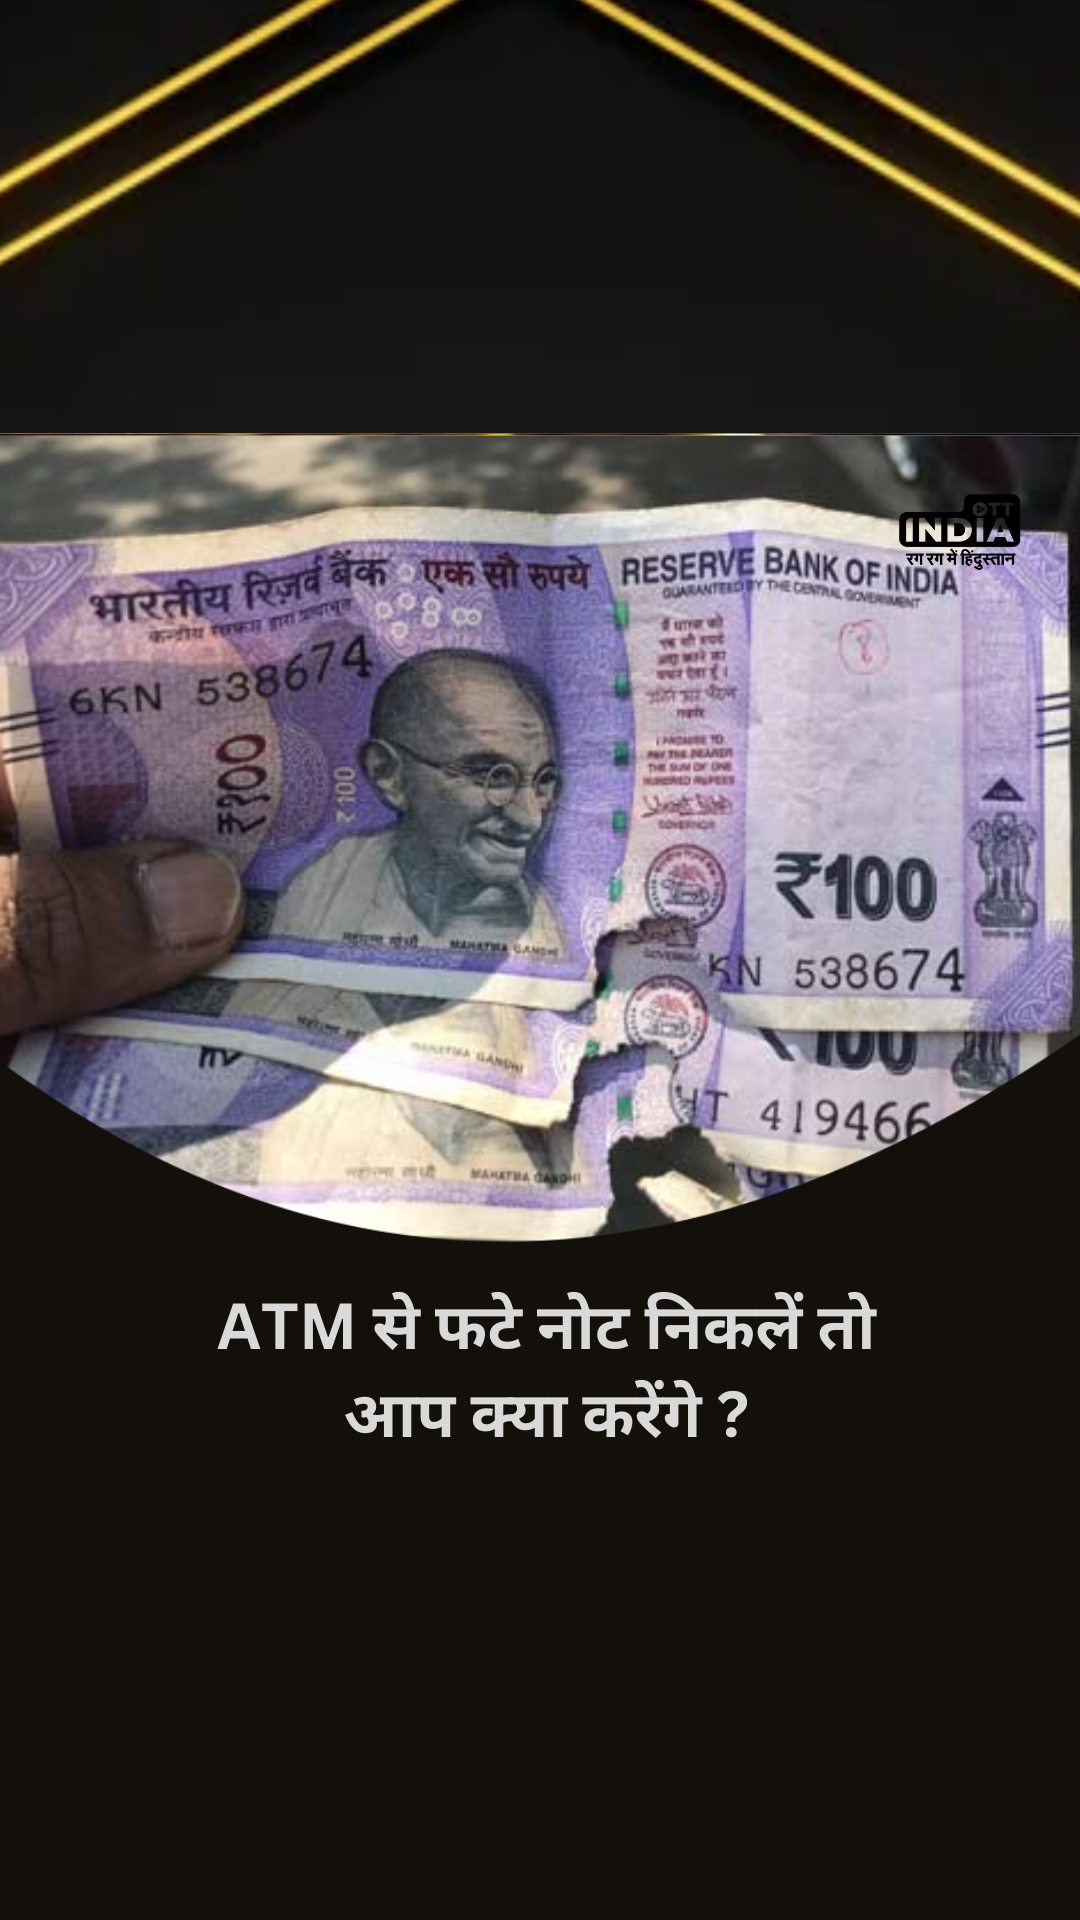 How to exchange ATM dispensed mutilated or torn notes? Utility News